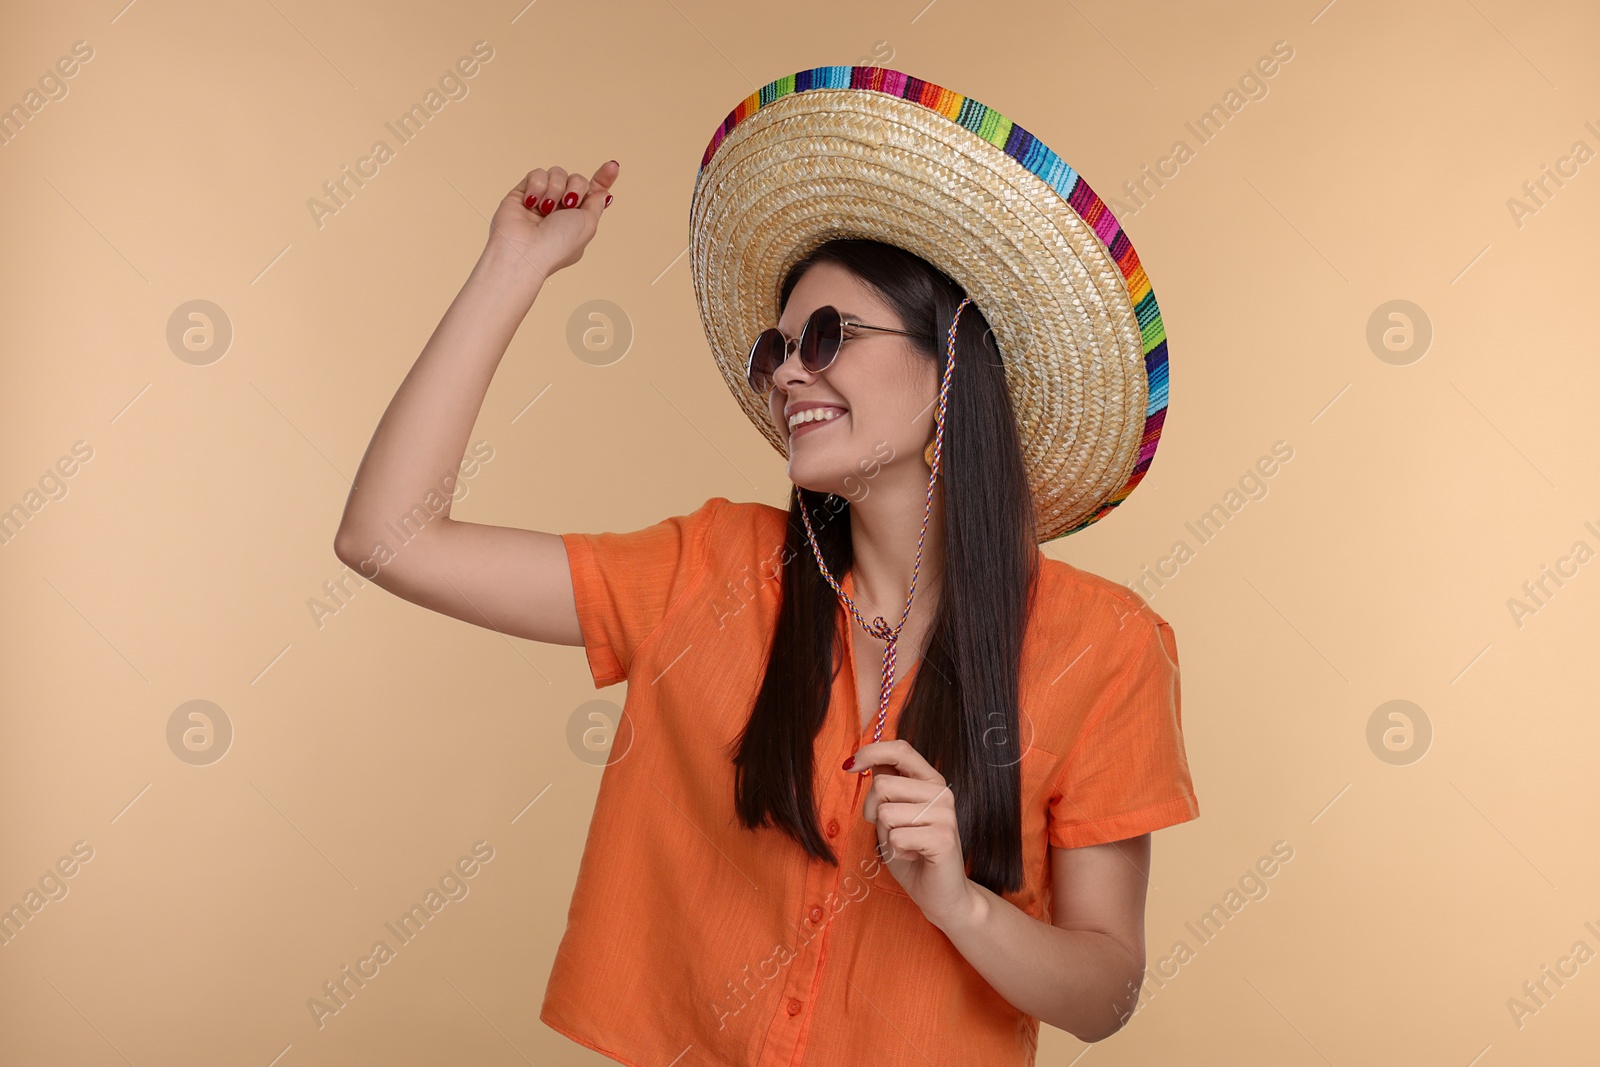 Photo of Young woman in Mexican sombrero hat and sunglasses dancing on beige background